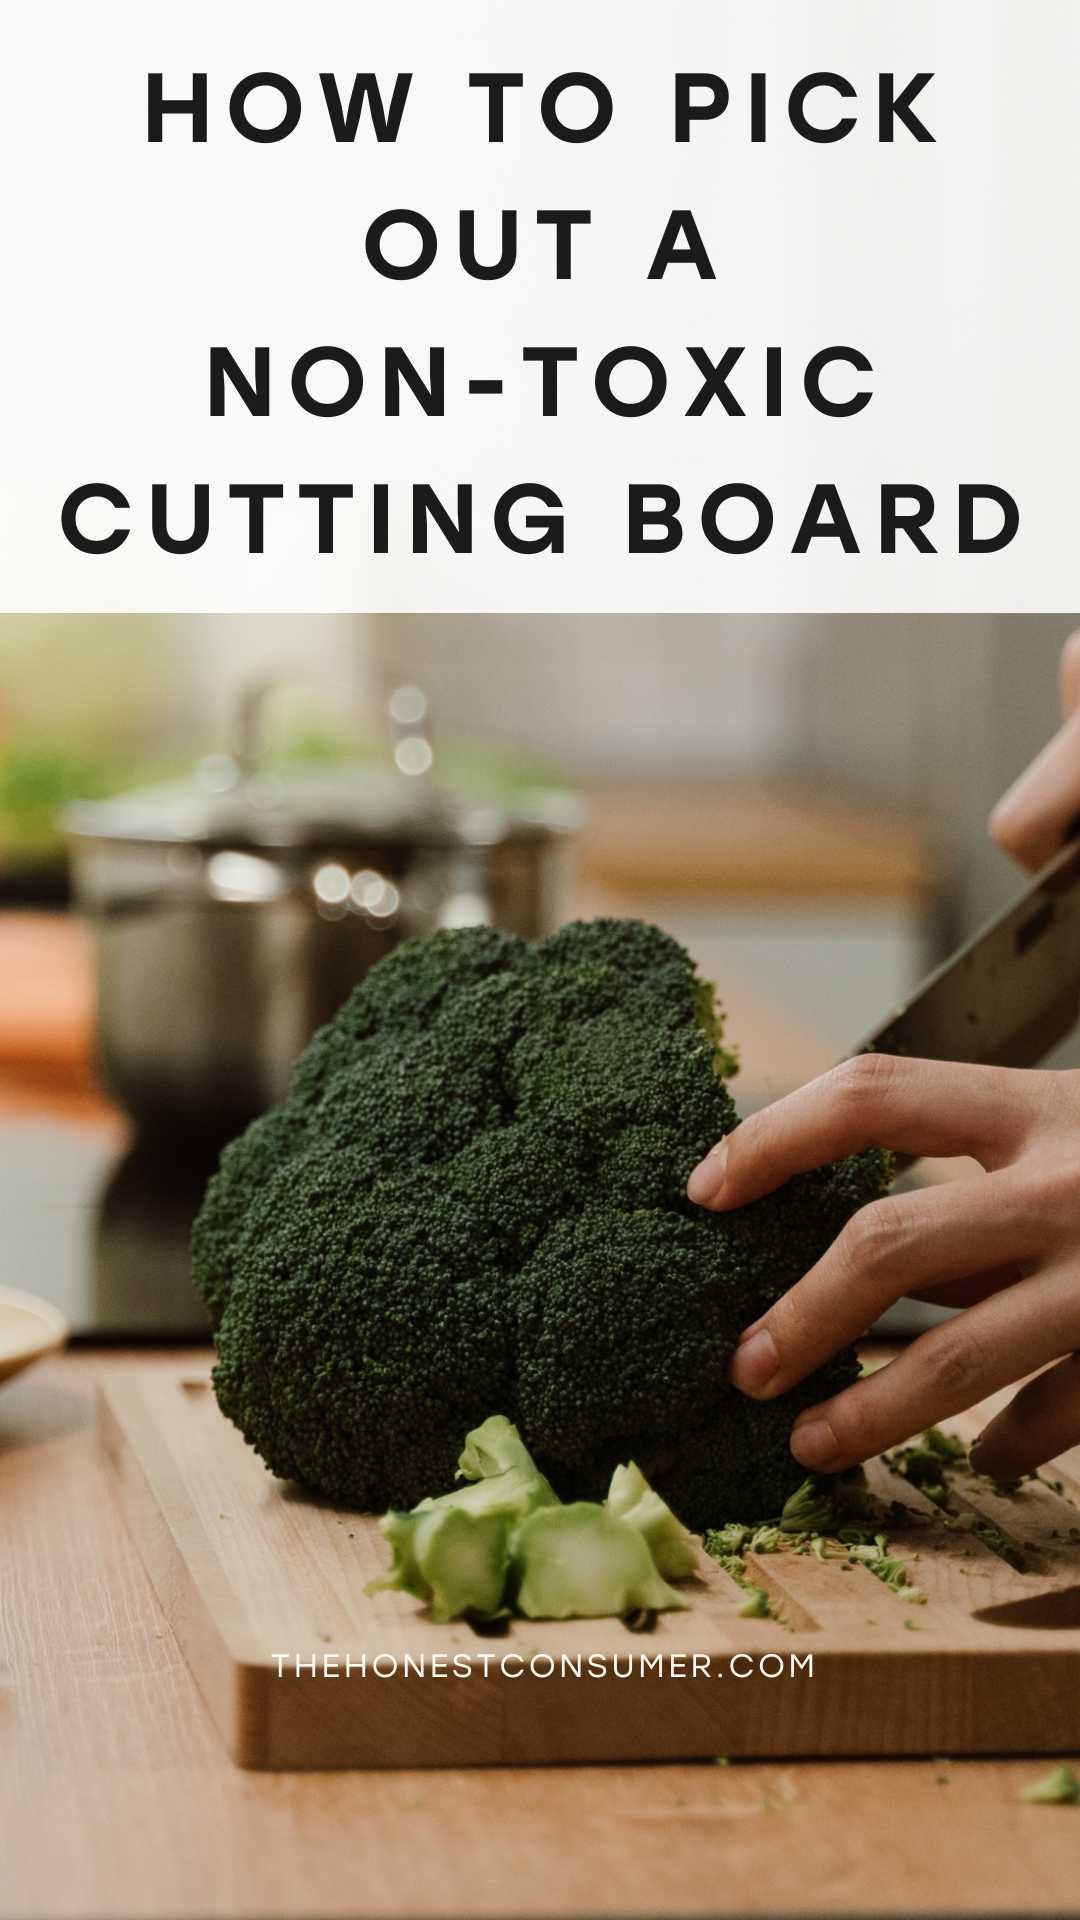 Making meals without microplastics: Tips for safer cutting boards